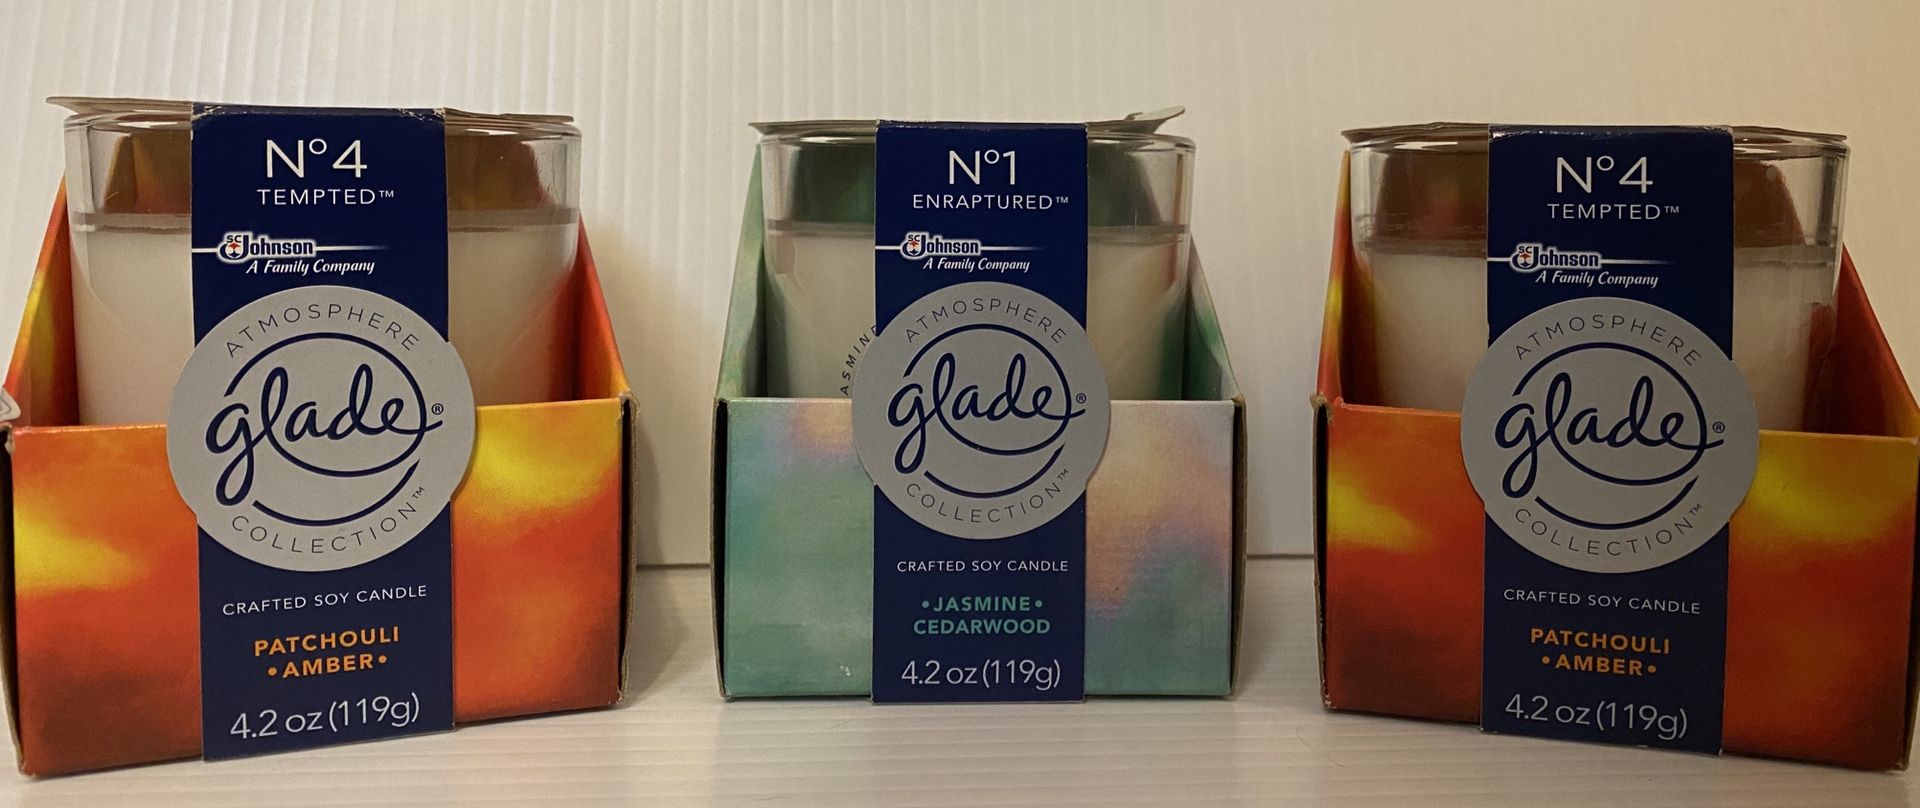 3 NEW GLADE atmosphere collection candles!